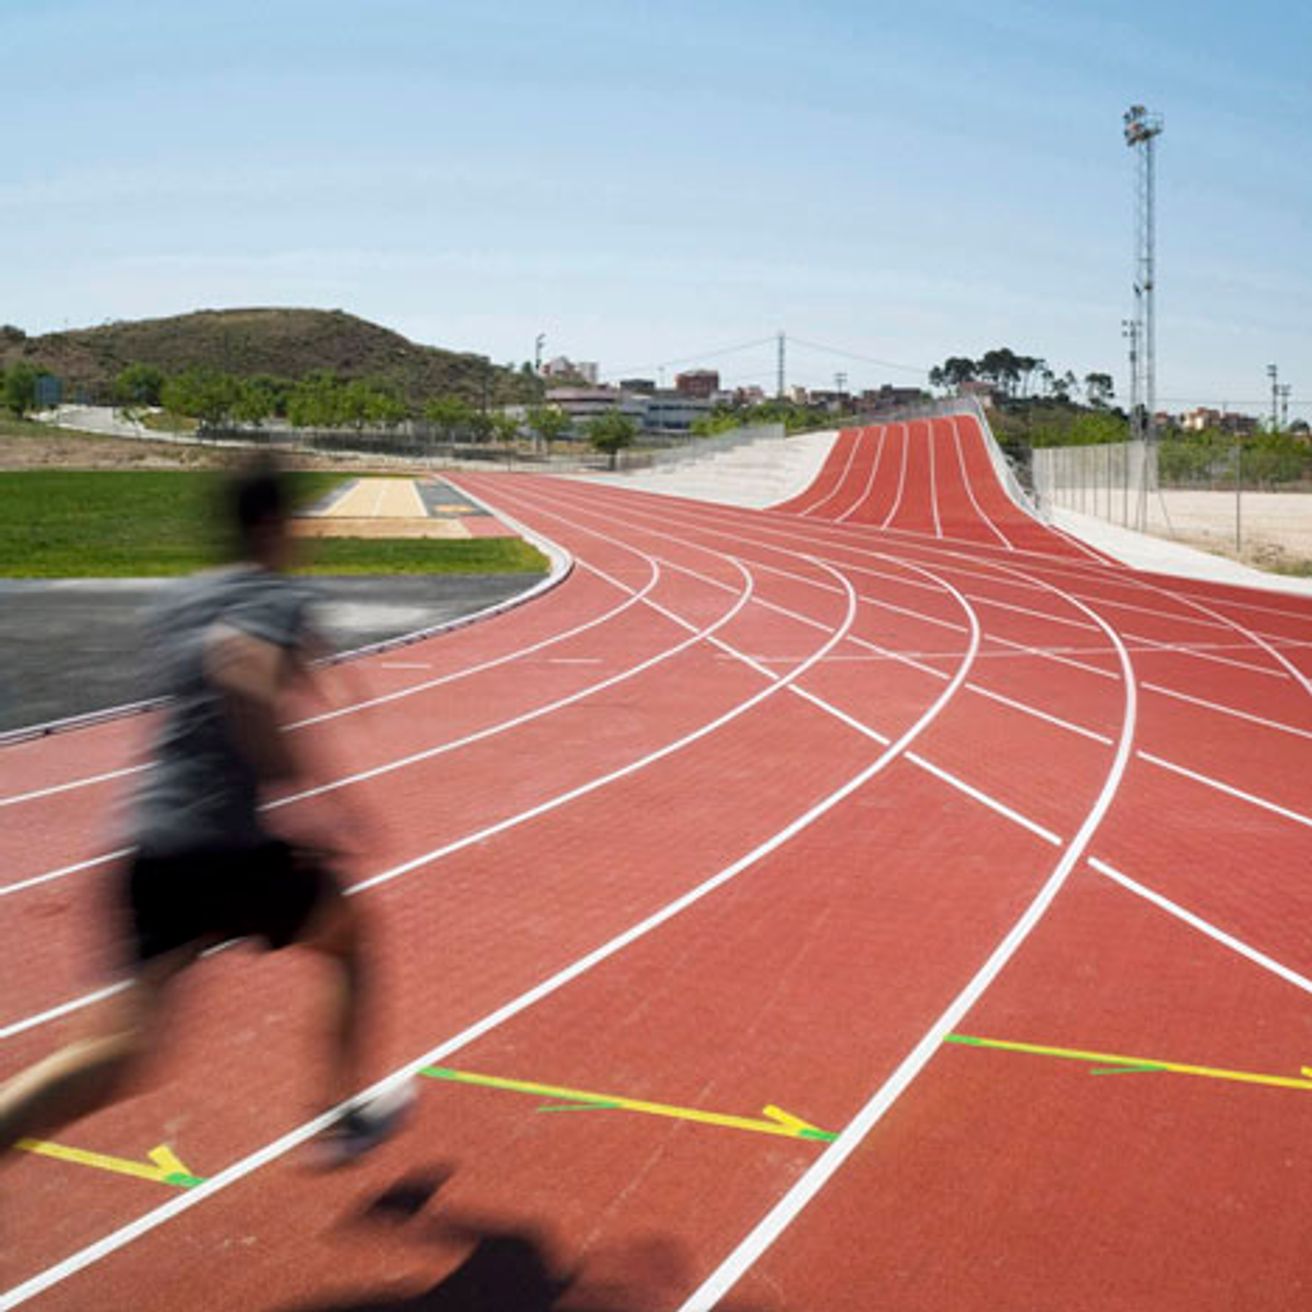 266,362 Athletics Track Images, Stock Photos, 3D objects